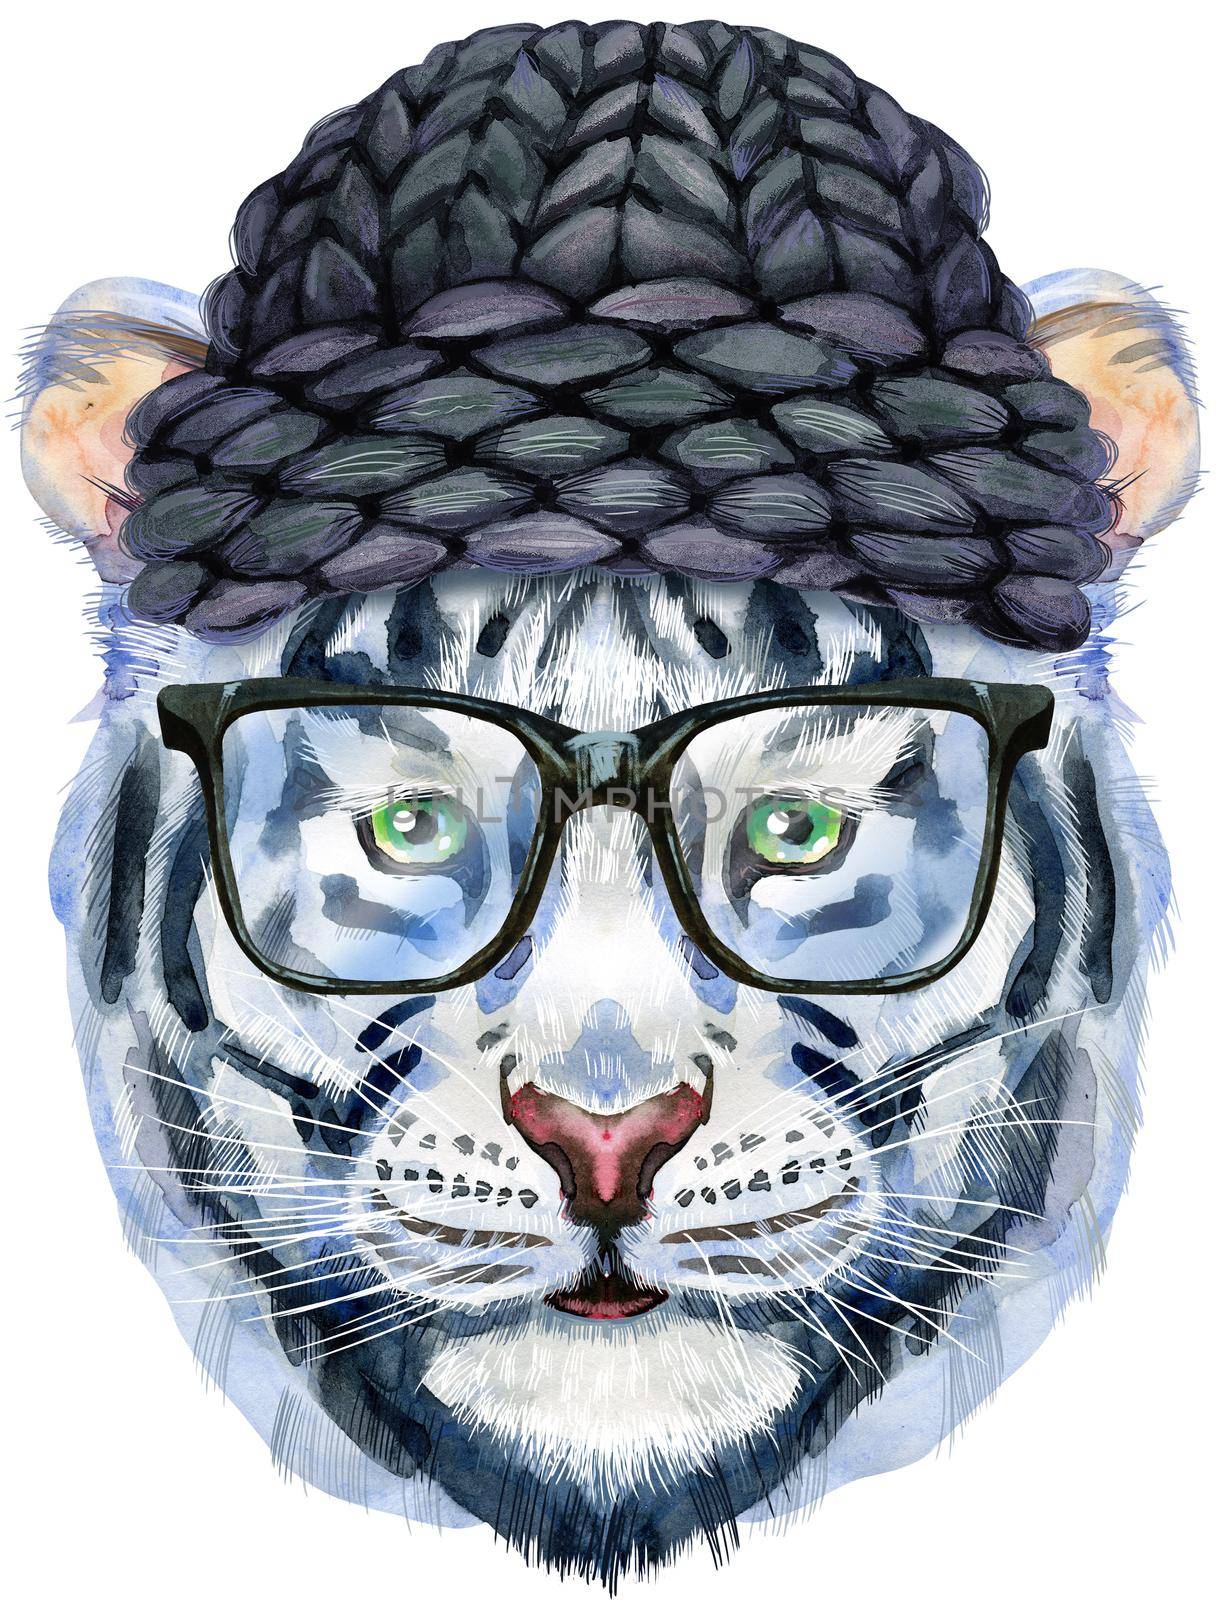 Colorful white tiger in a knitted black hat and glasses. Wild animal watercolor illustration on white background by NataOmsk